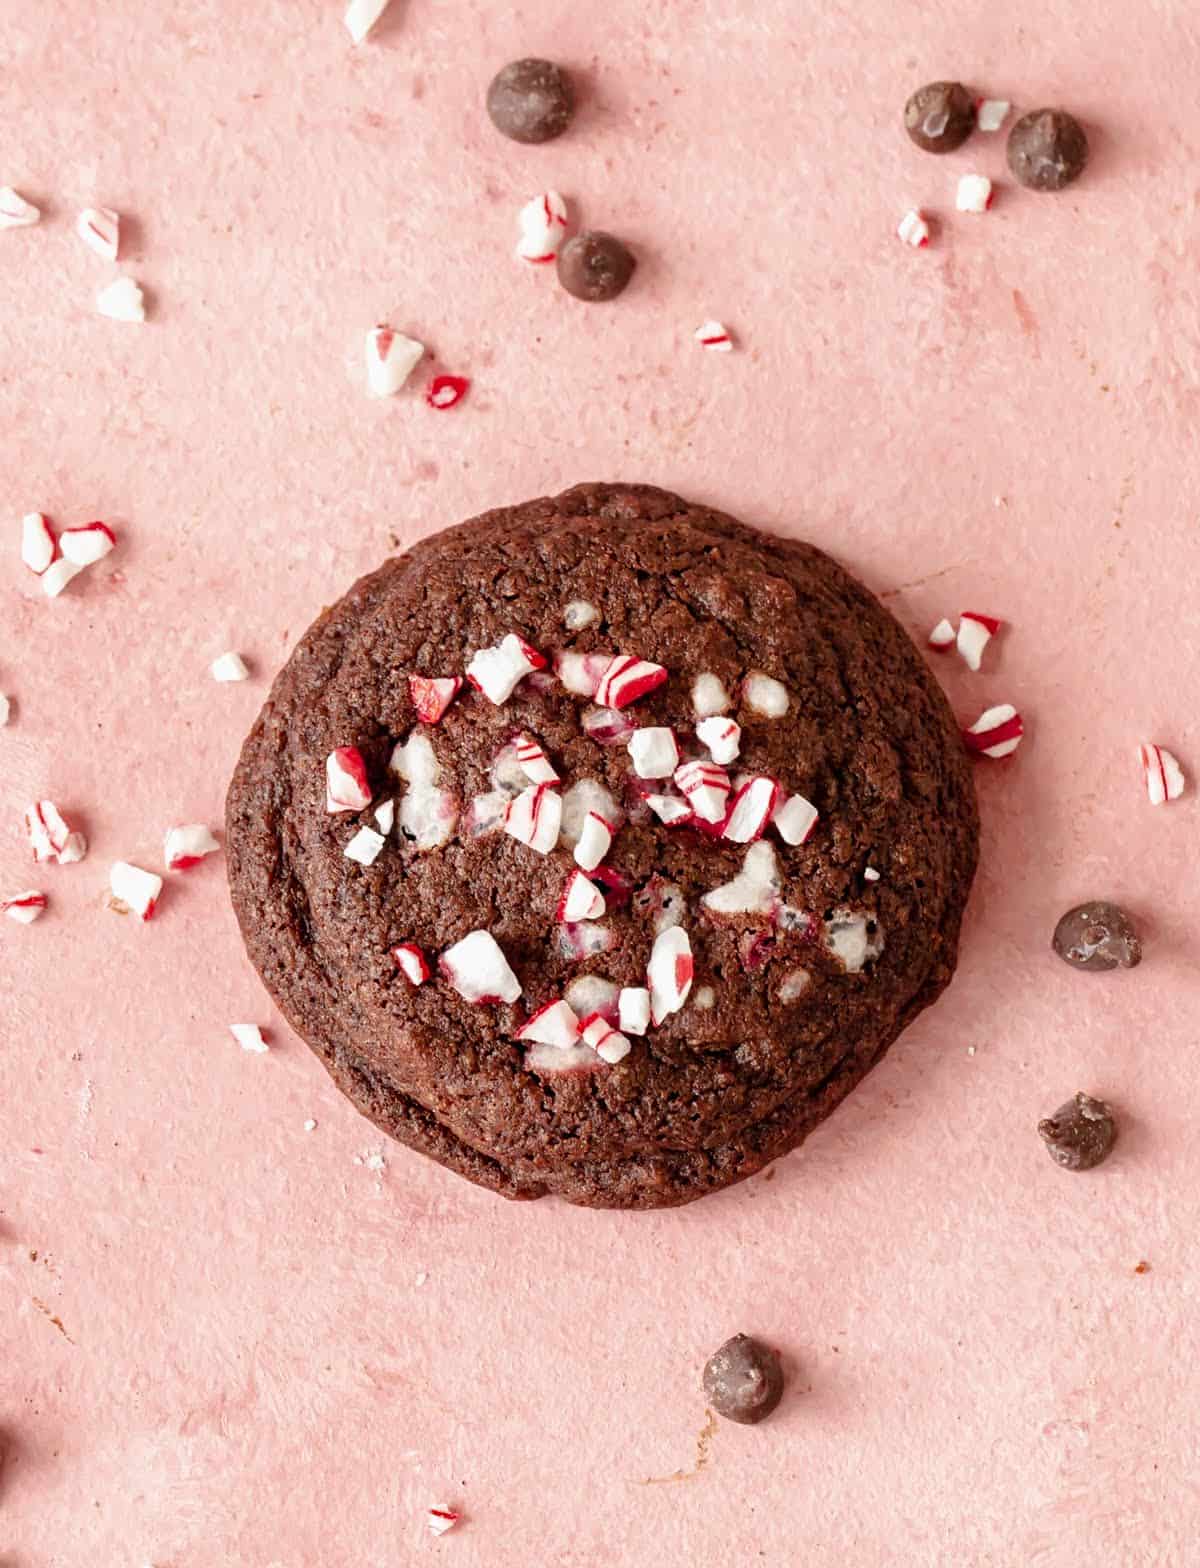 Top view of single chocolate peppermint cookie on pink surface, loose candy and chips around.